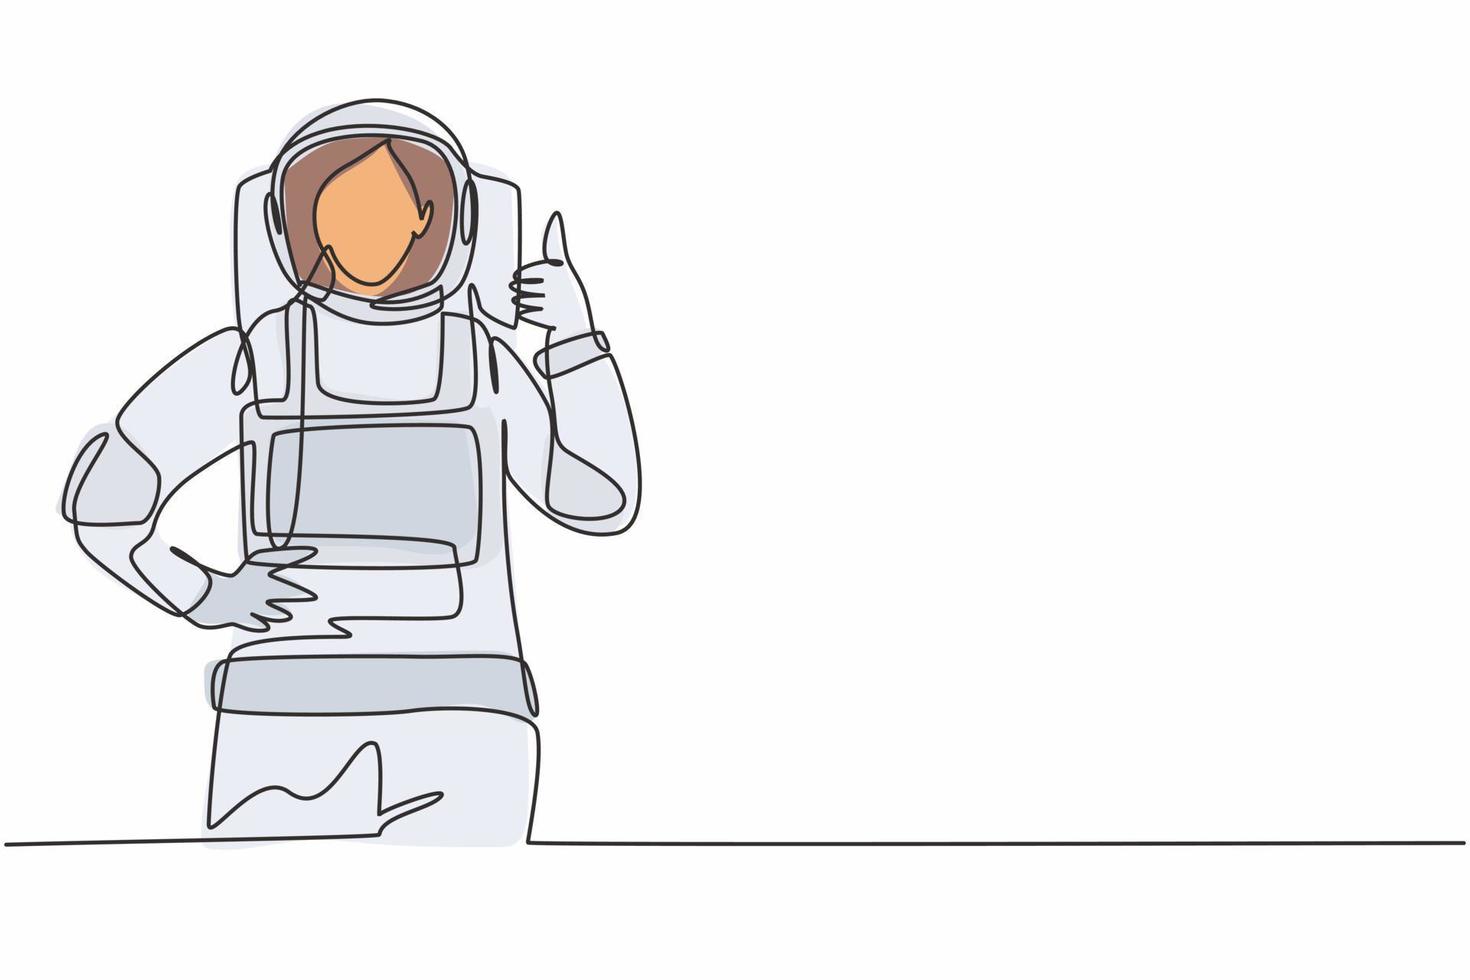 Single one line drawing of female astronauts with a thumbs-up gesture wearing spacesuits to explore space in search the mysteries of universe. Continuous line draw design graphic vector illustration